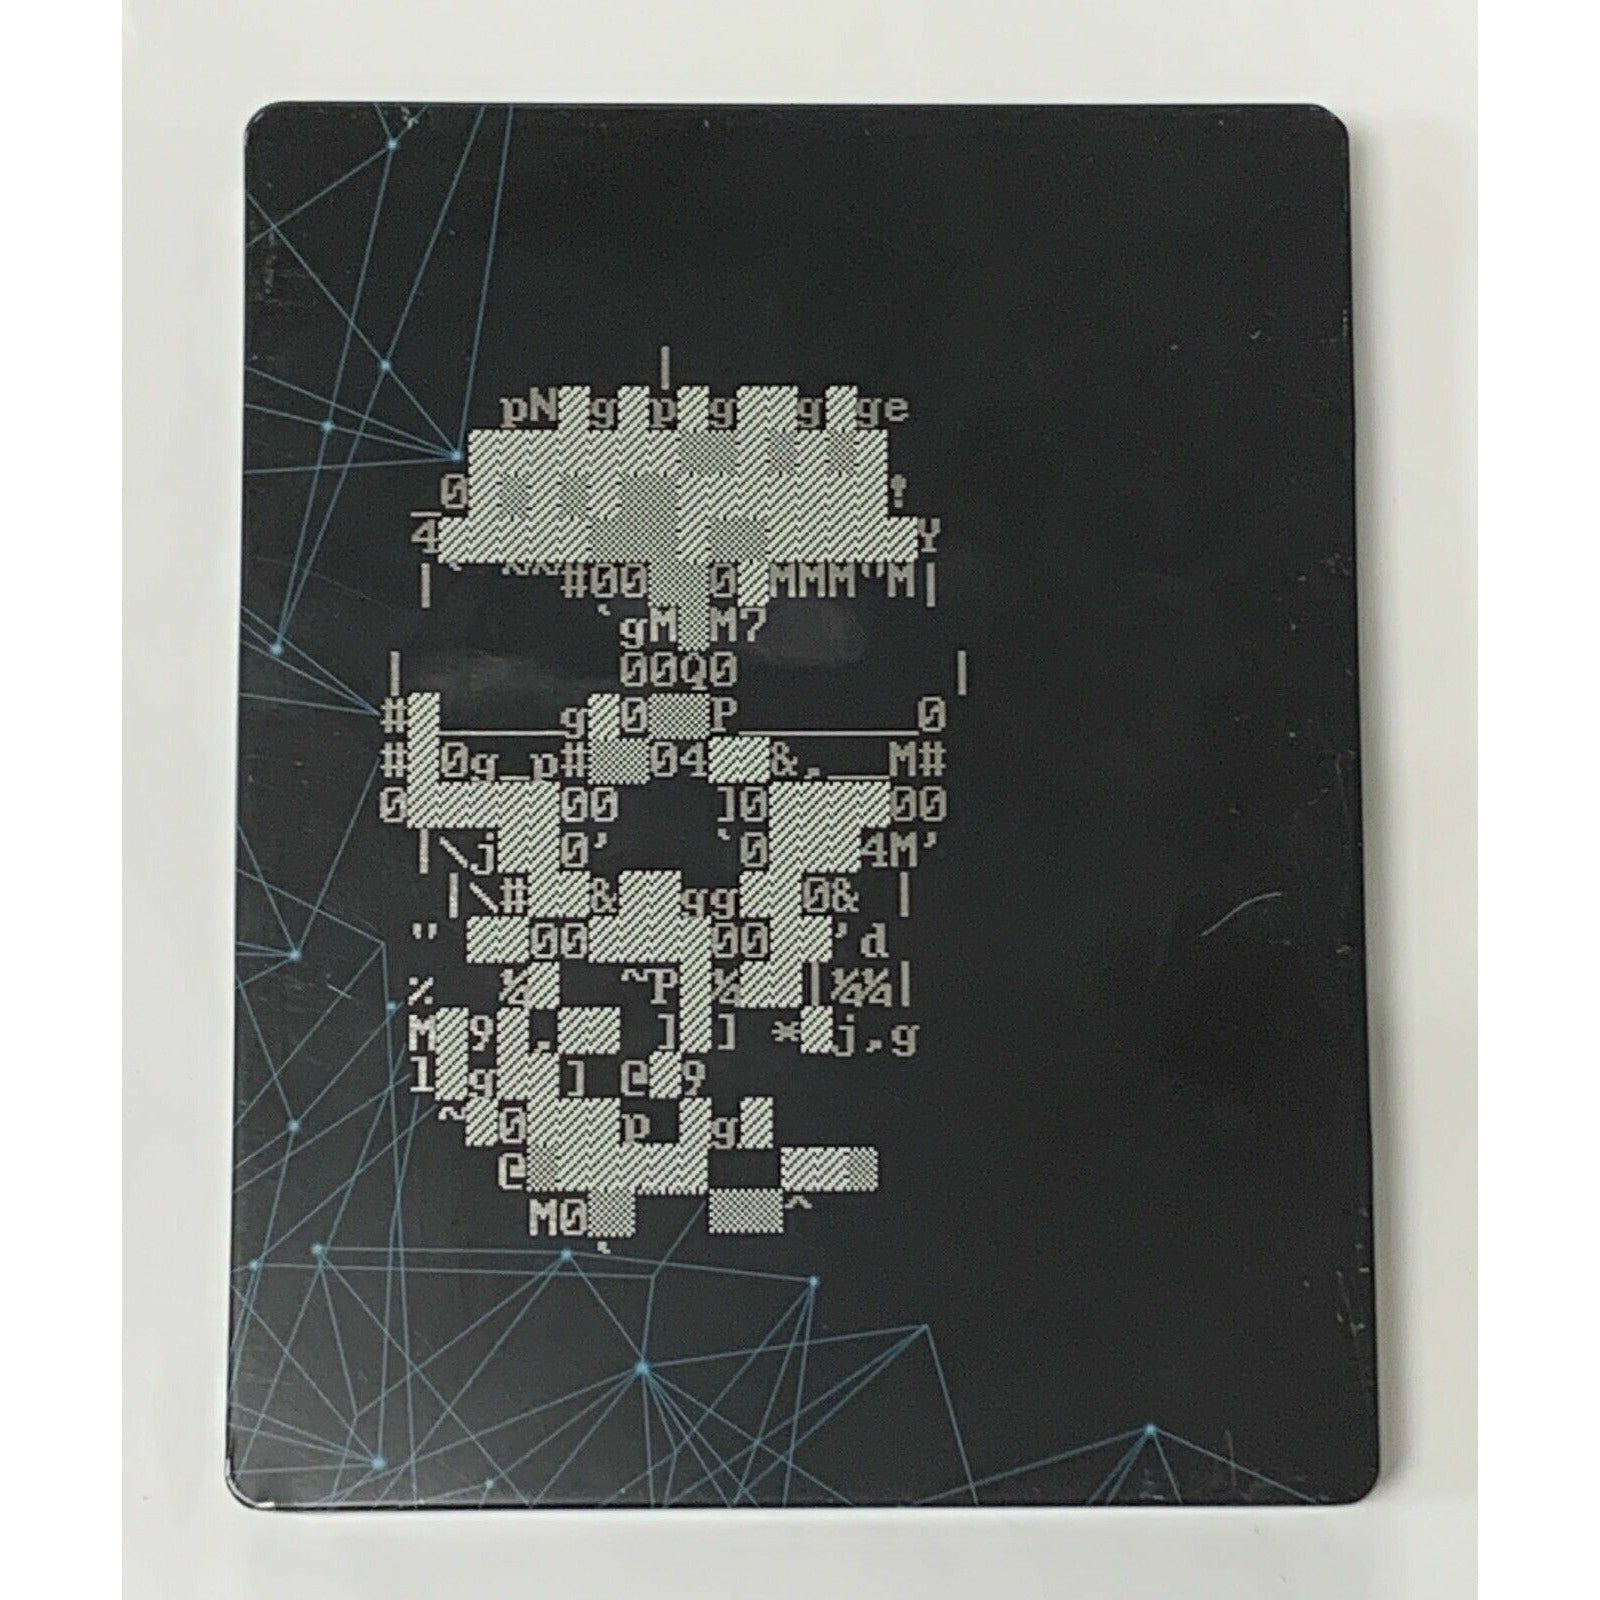 XBOX ONE - Watch Dogs Limited Edition Steelbook (Missing Soundtrack)